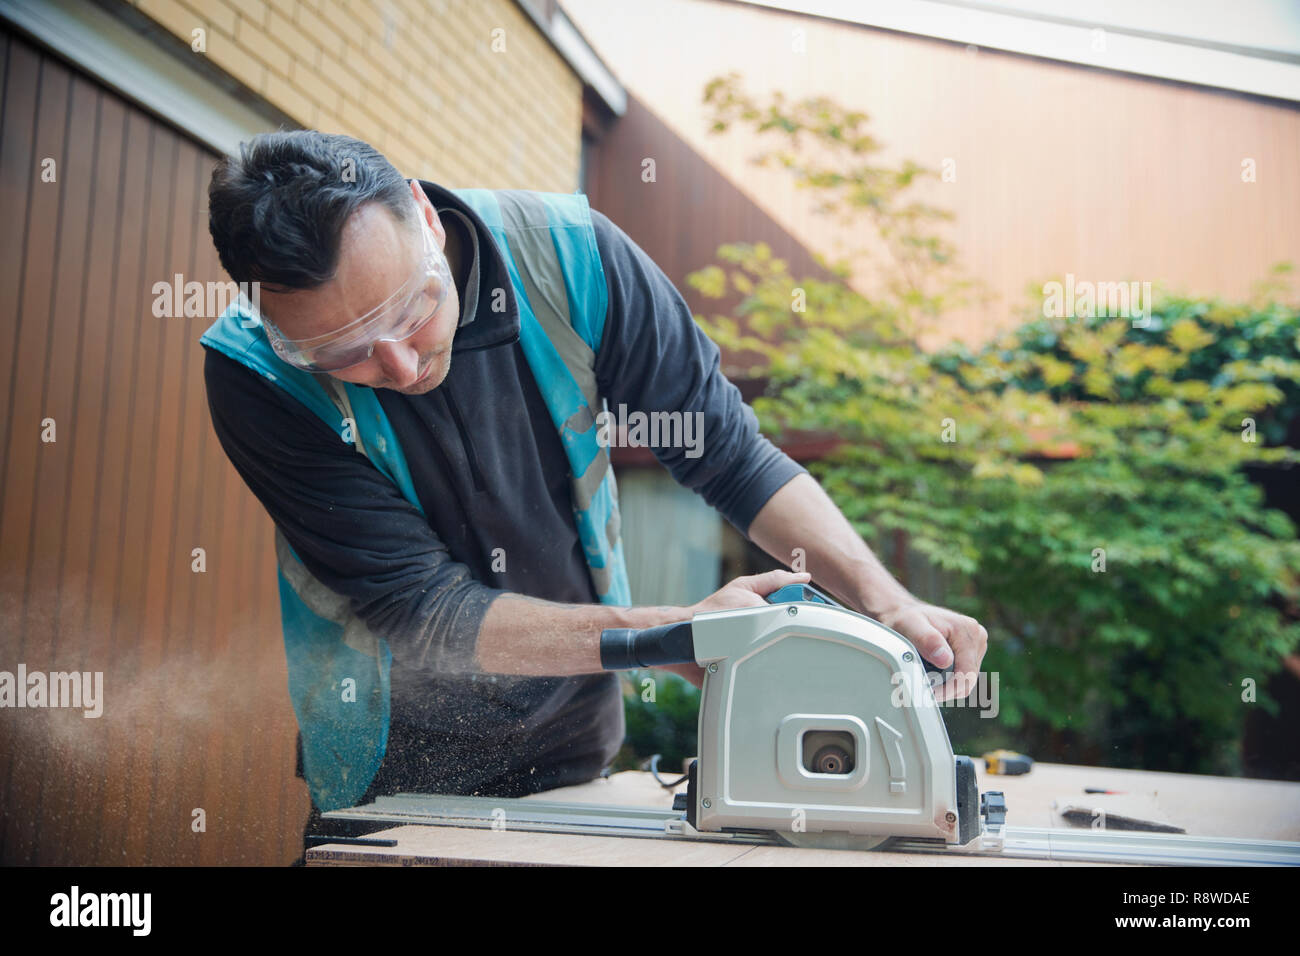 Construction worker using table saw in driveway Stock Photo